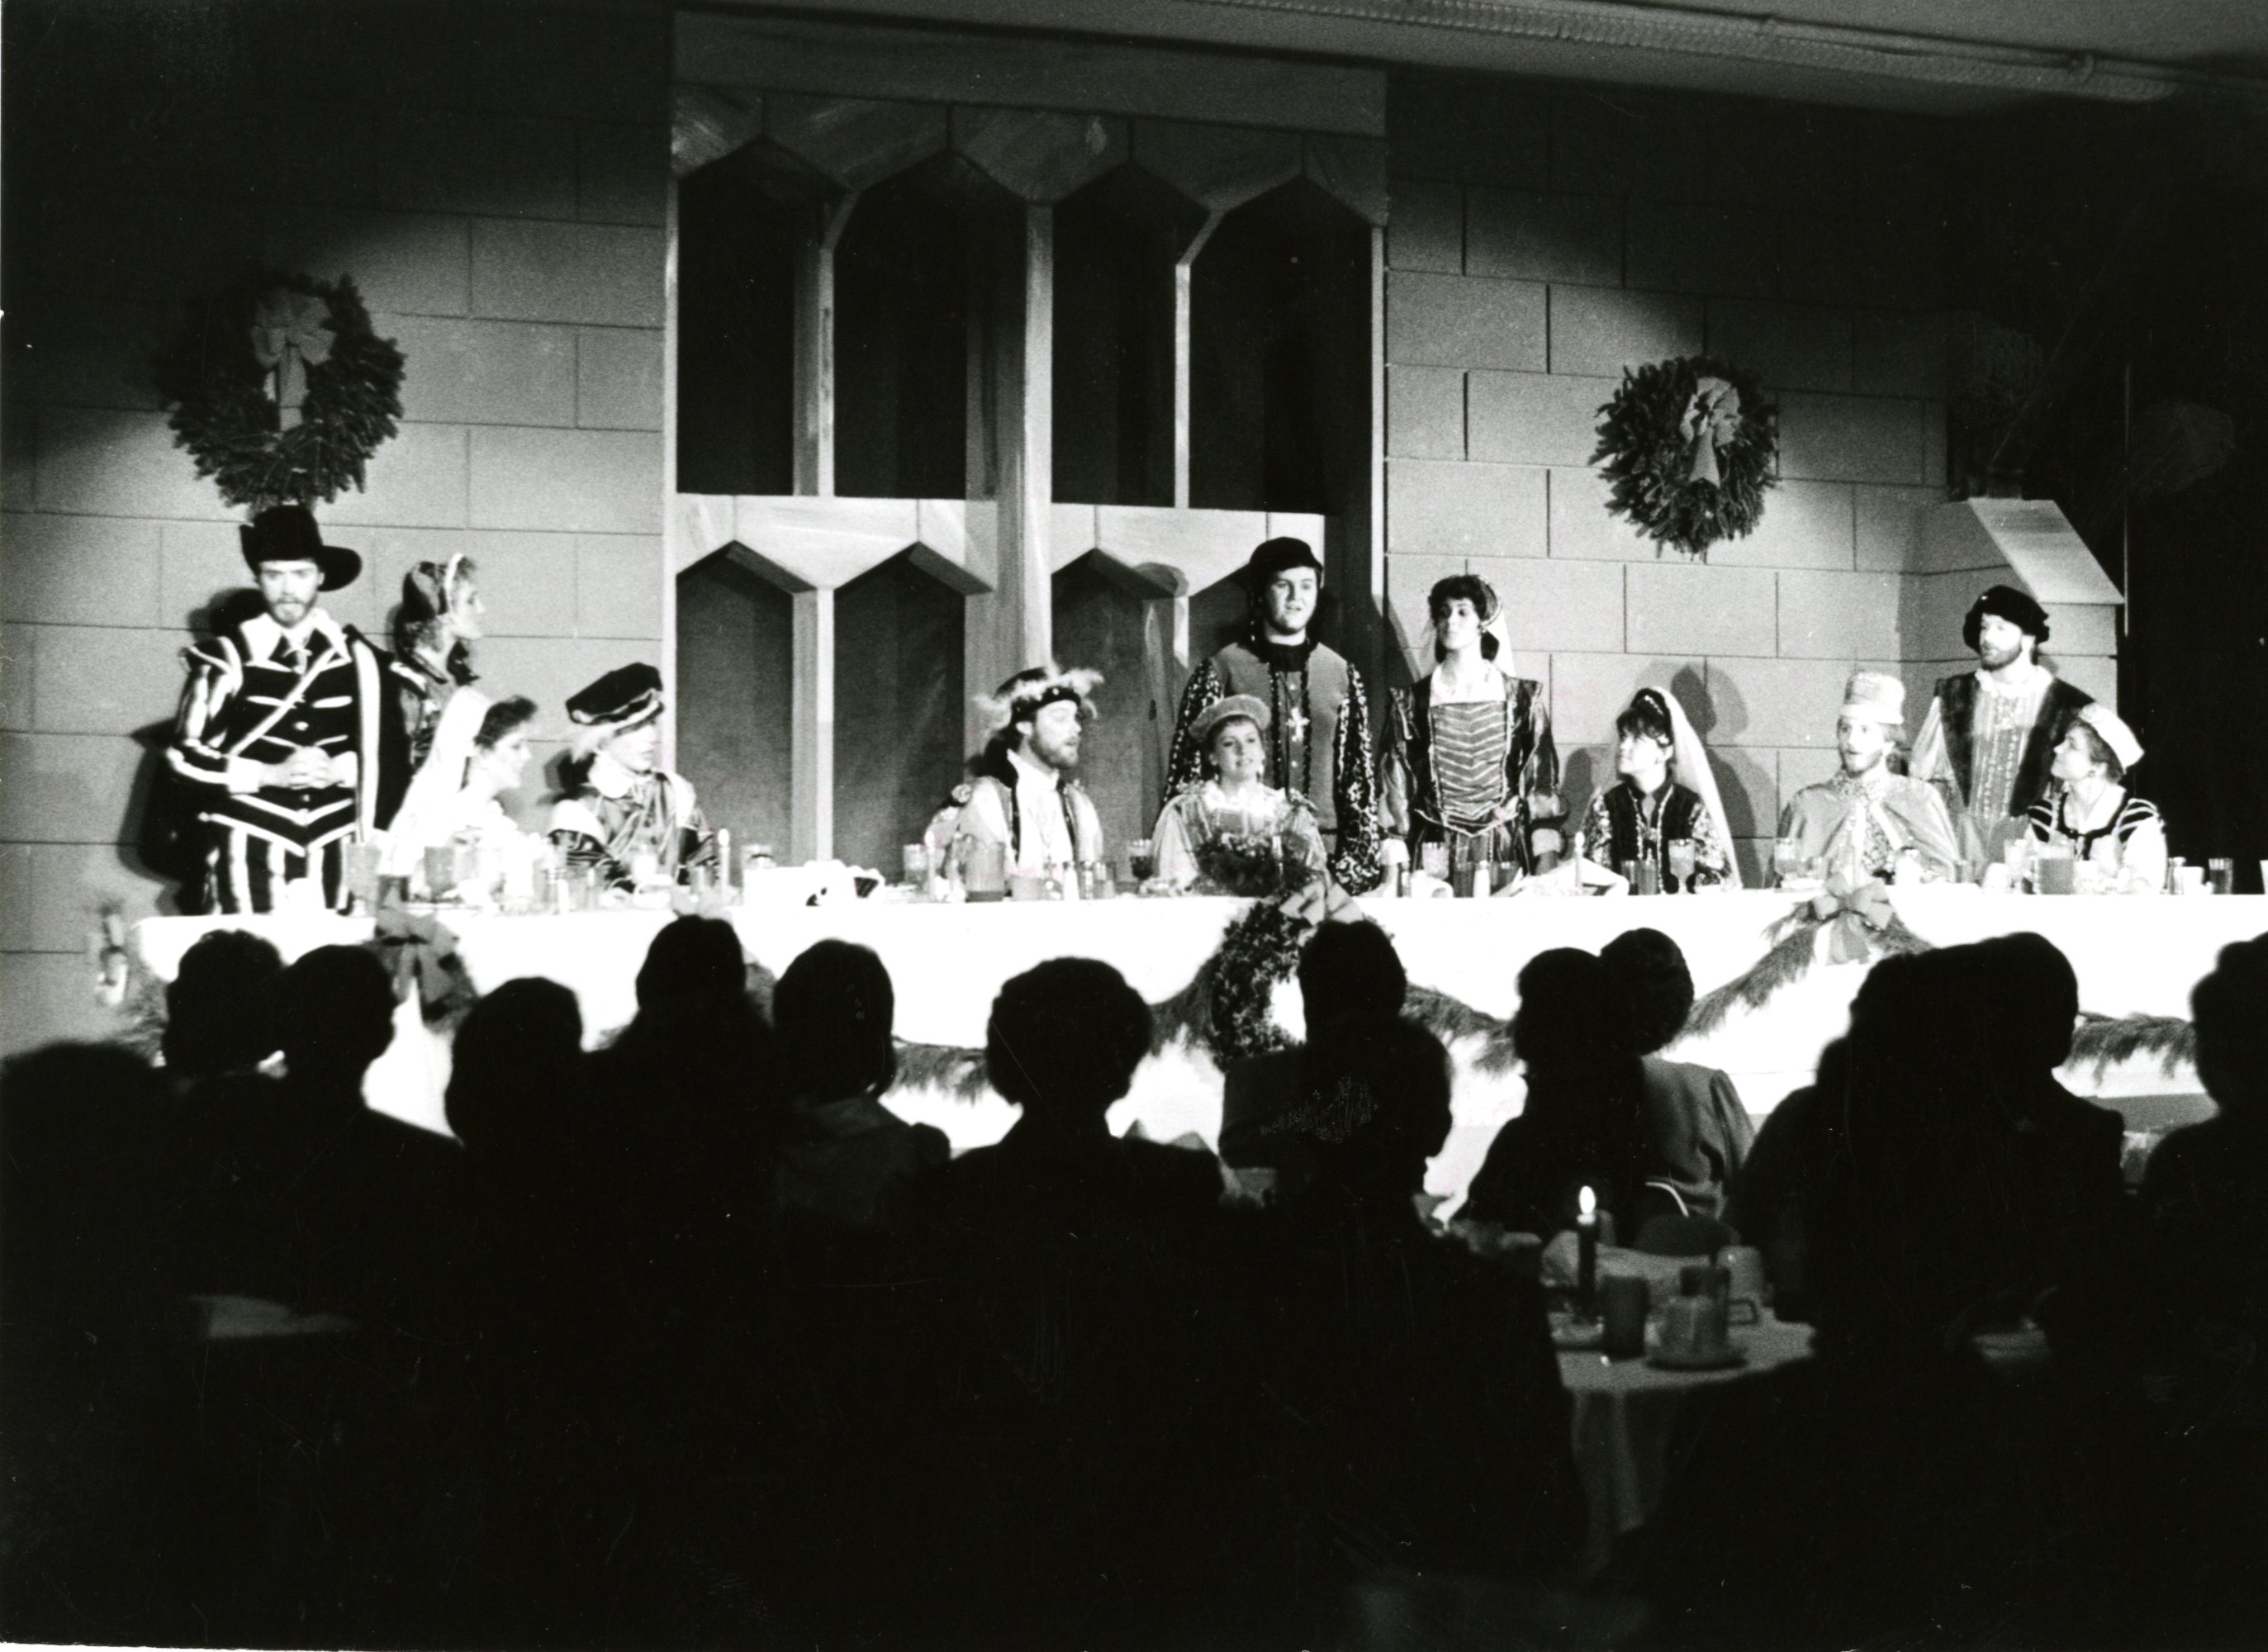 View of Madrigal concert from audience. Milligan College Archives & Special Collections.